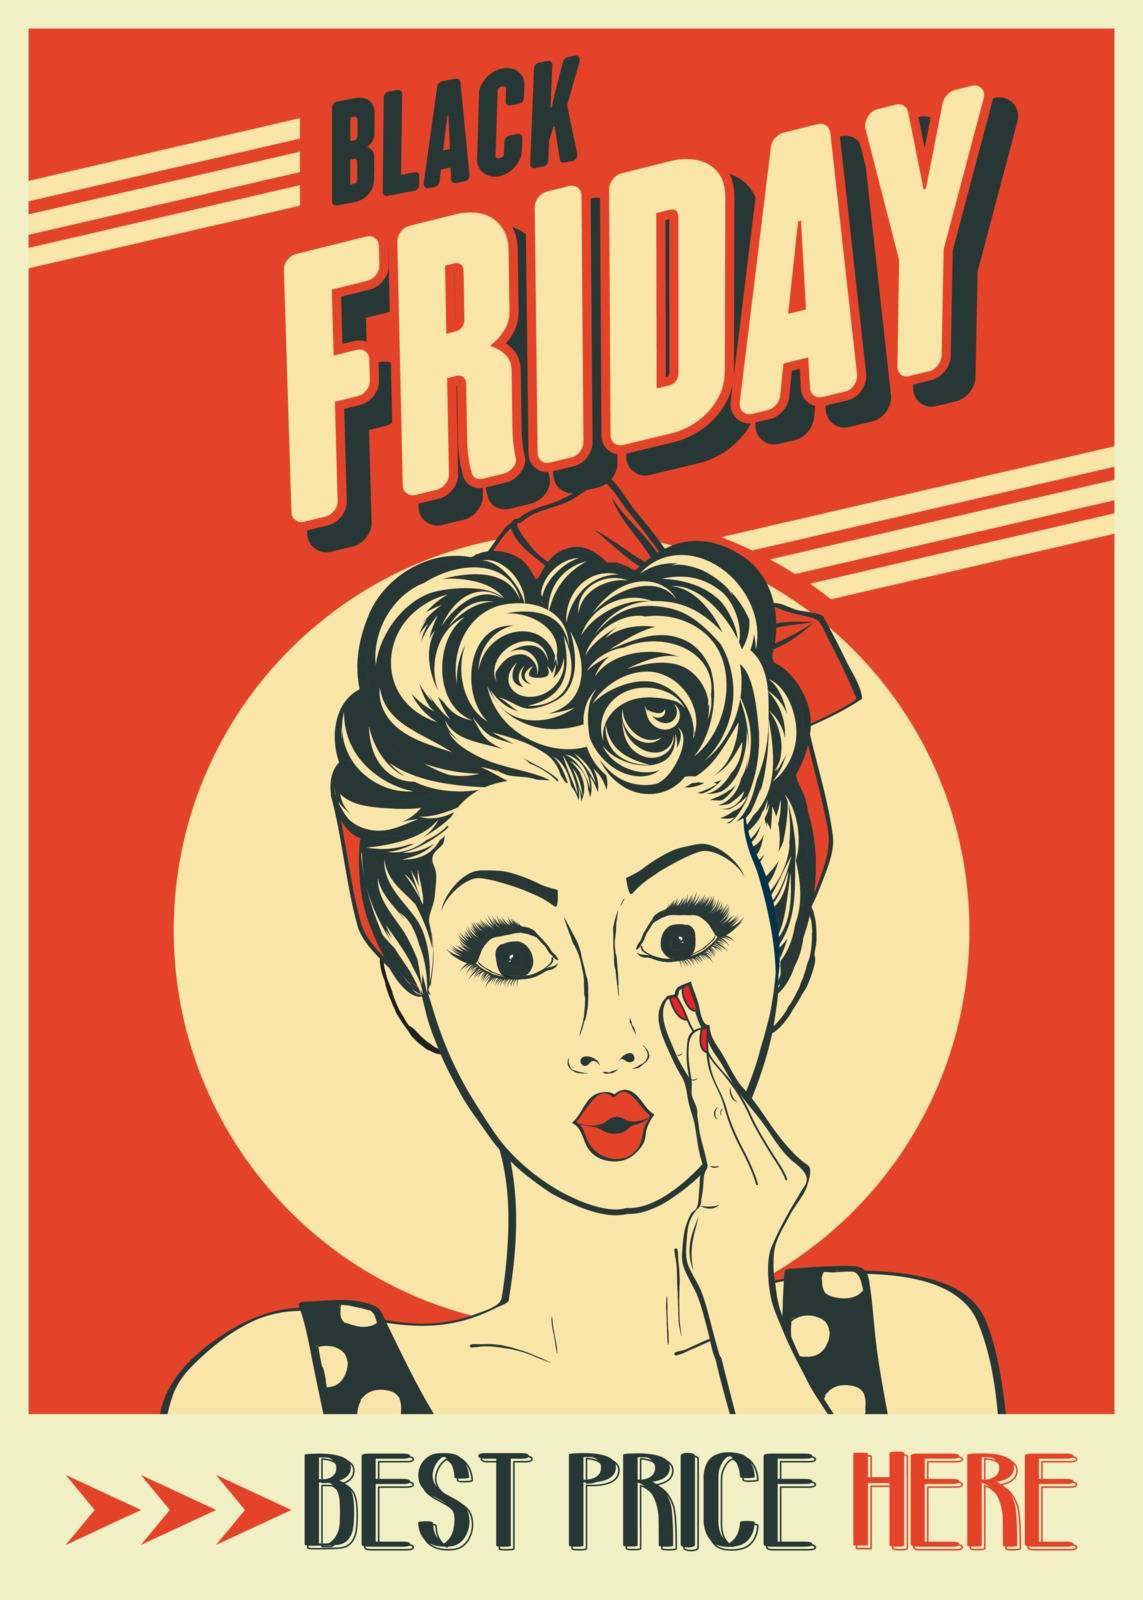 Black friday banner with pin-up girl. Retro style. by balasoiu